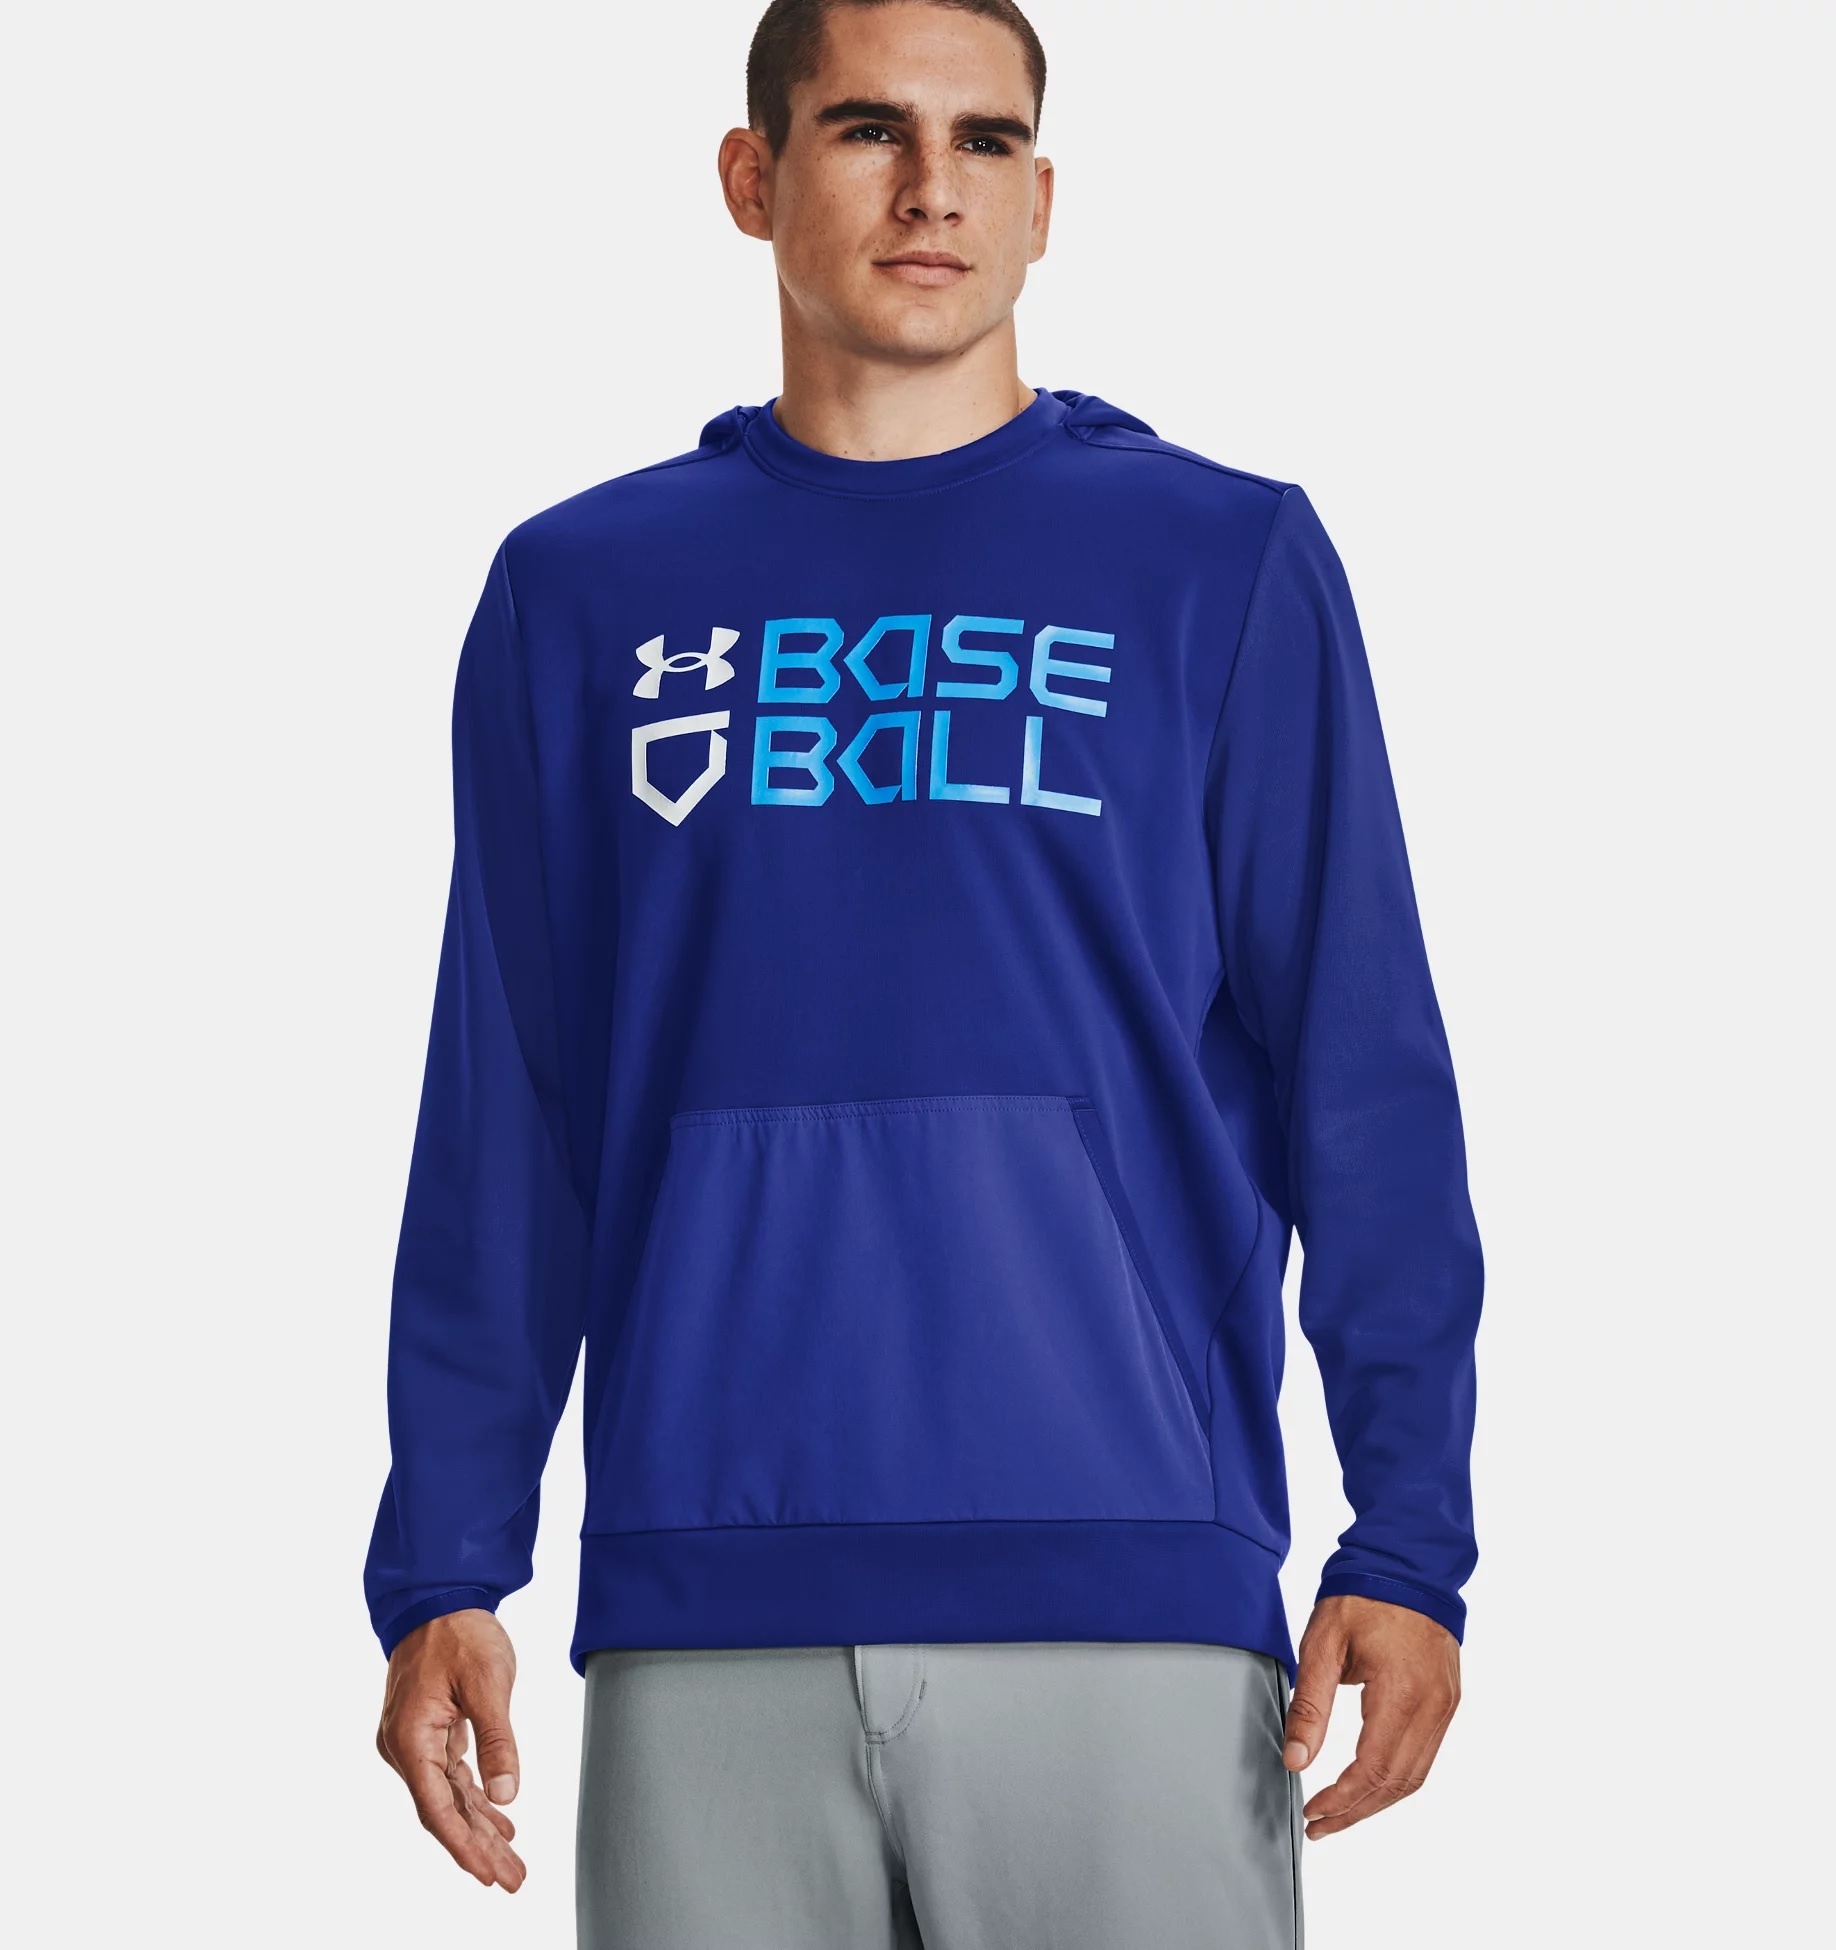 UNDER ARMOUR MENS BASEBALL GRAPHIC HOODIE